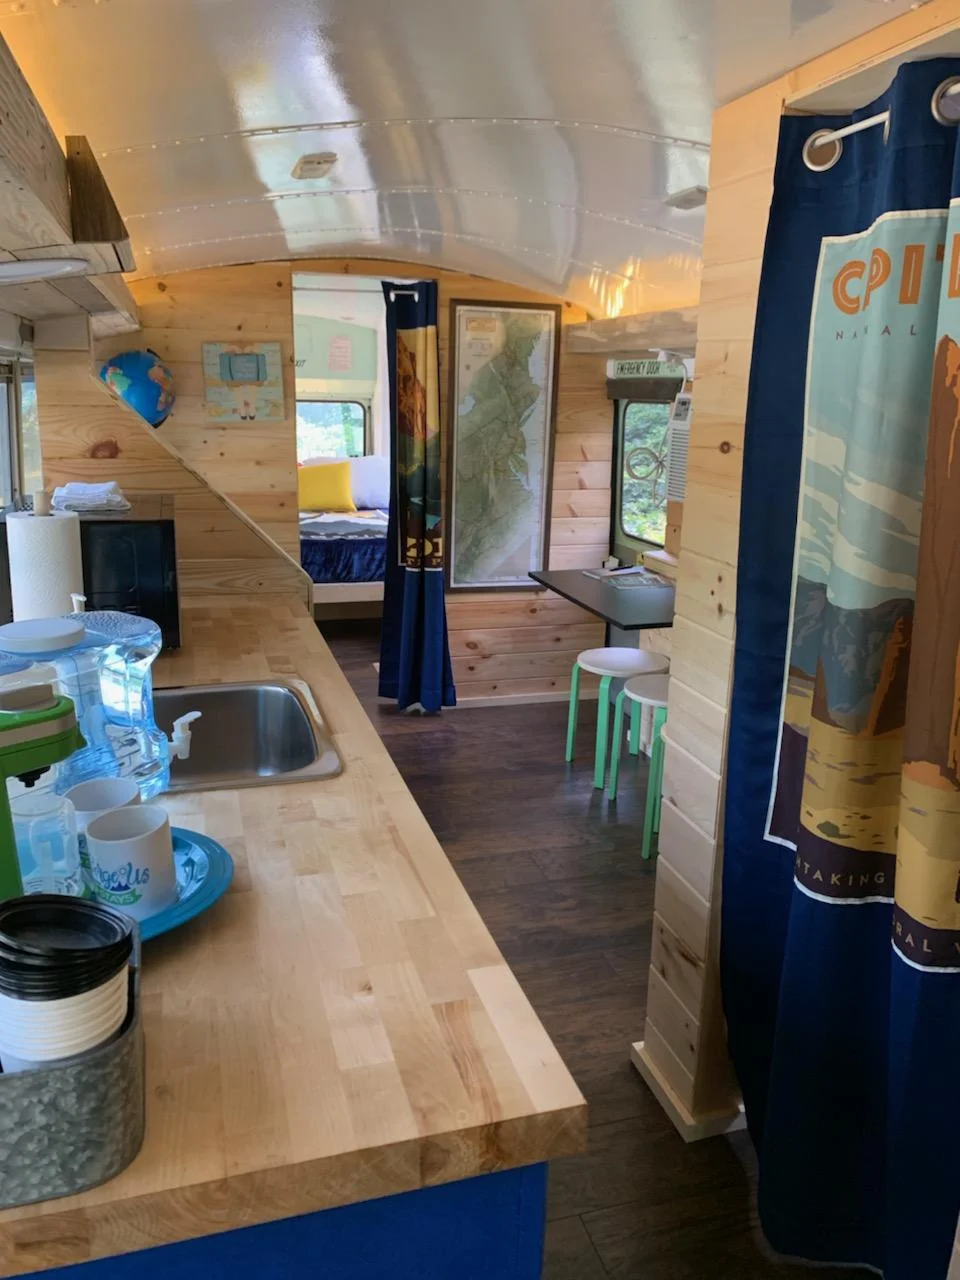 The Travel-Inn Skoolie bus with a rustic modern interior